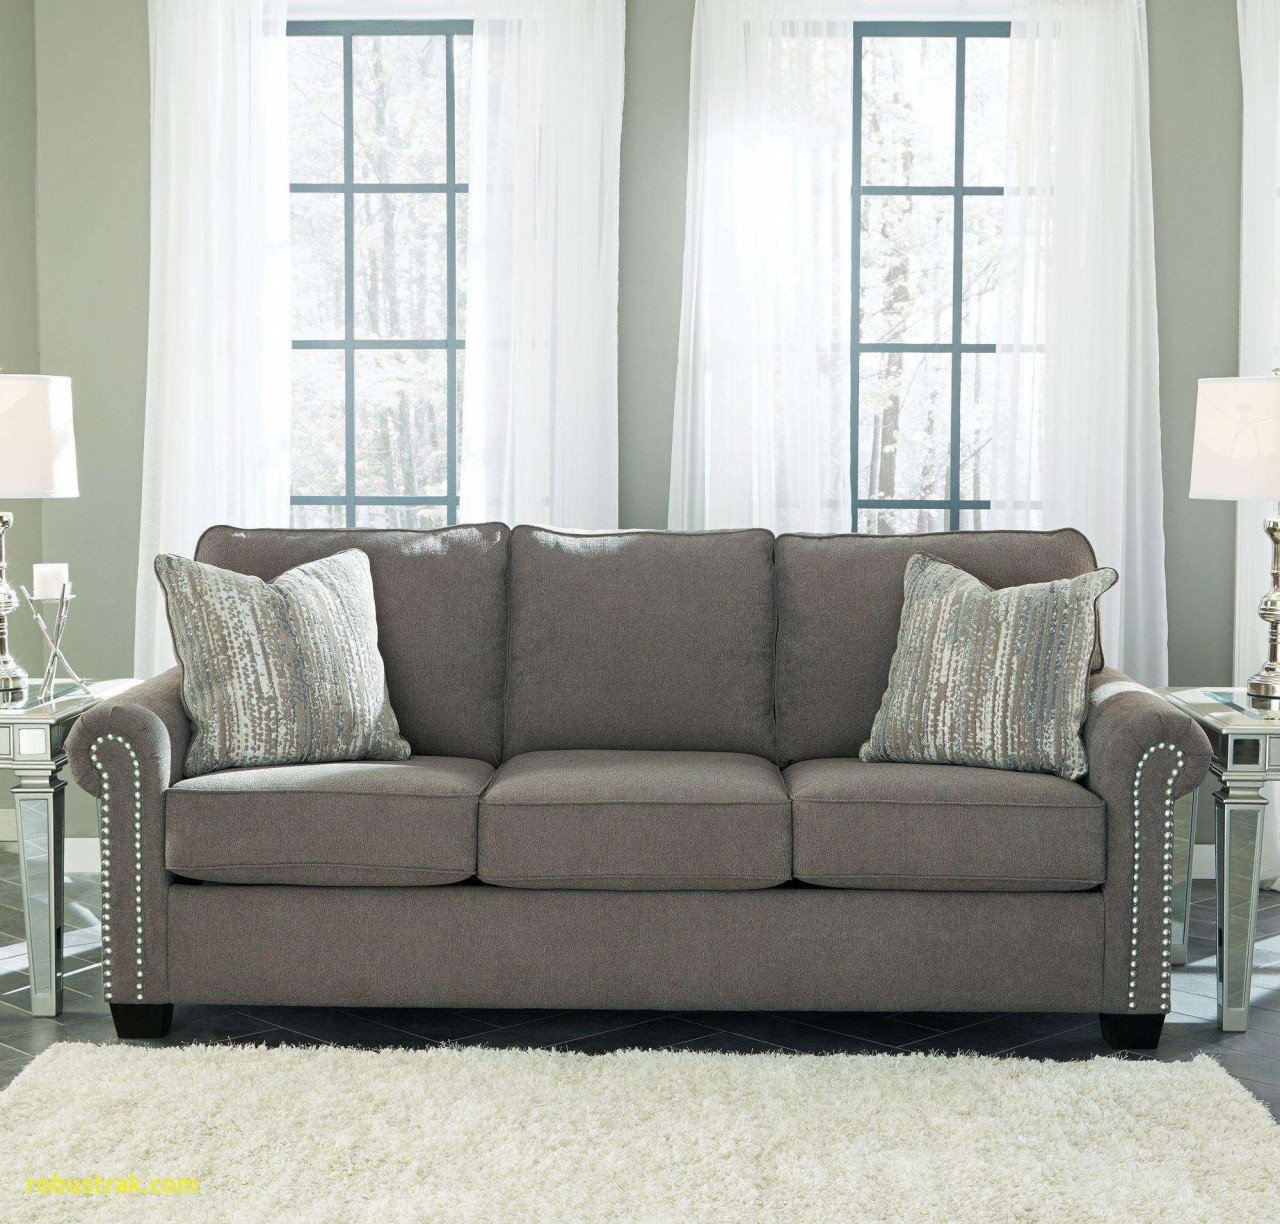 Grey and Red Bedroom Fresh Gray Couch Living Room — Procura Home Blog